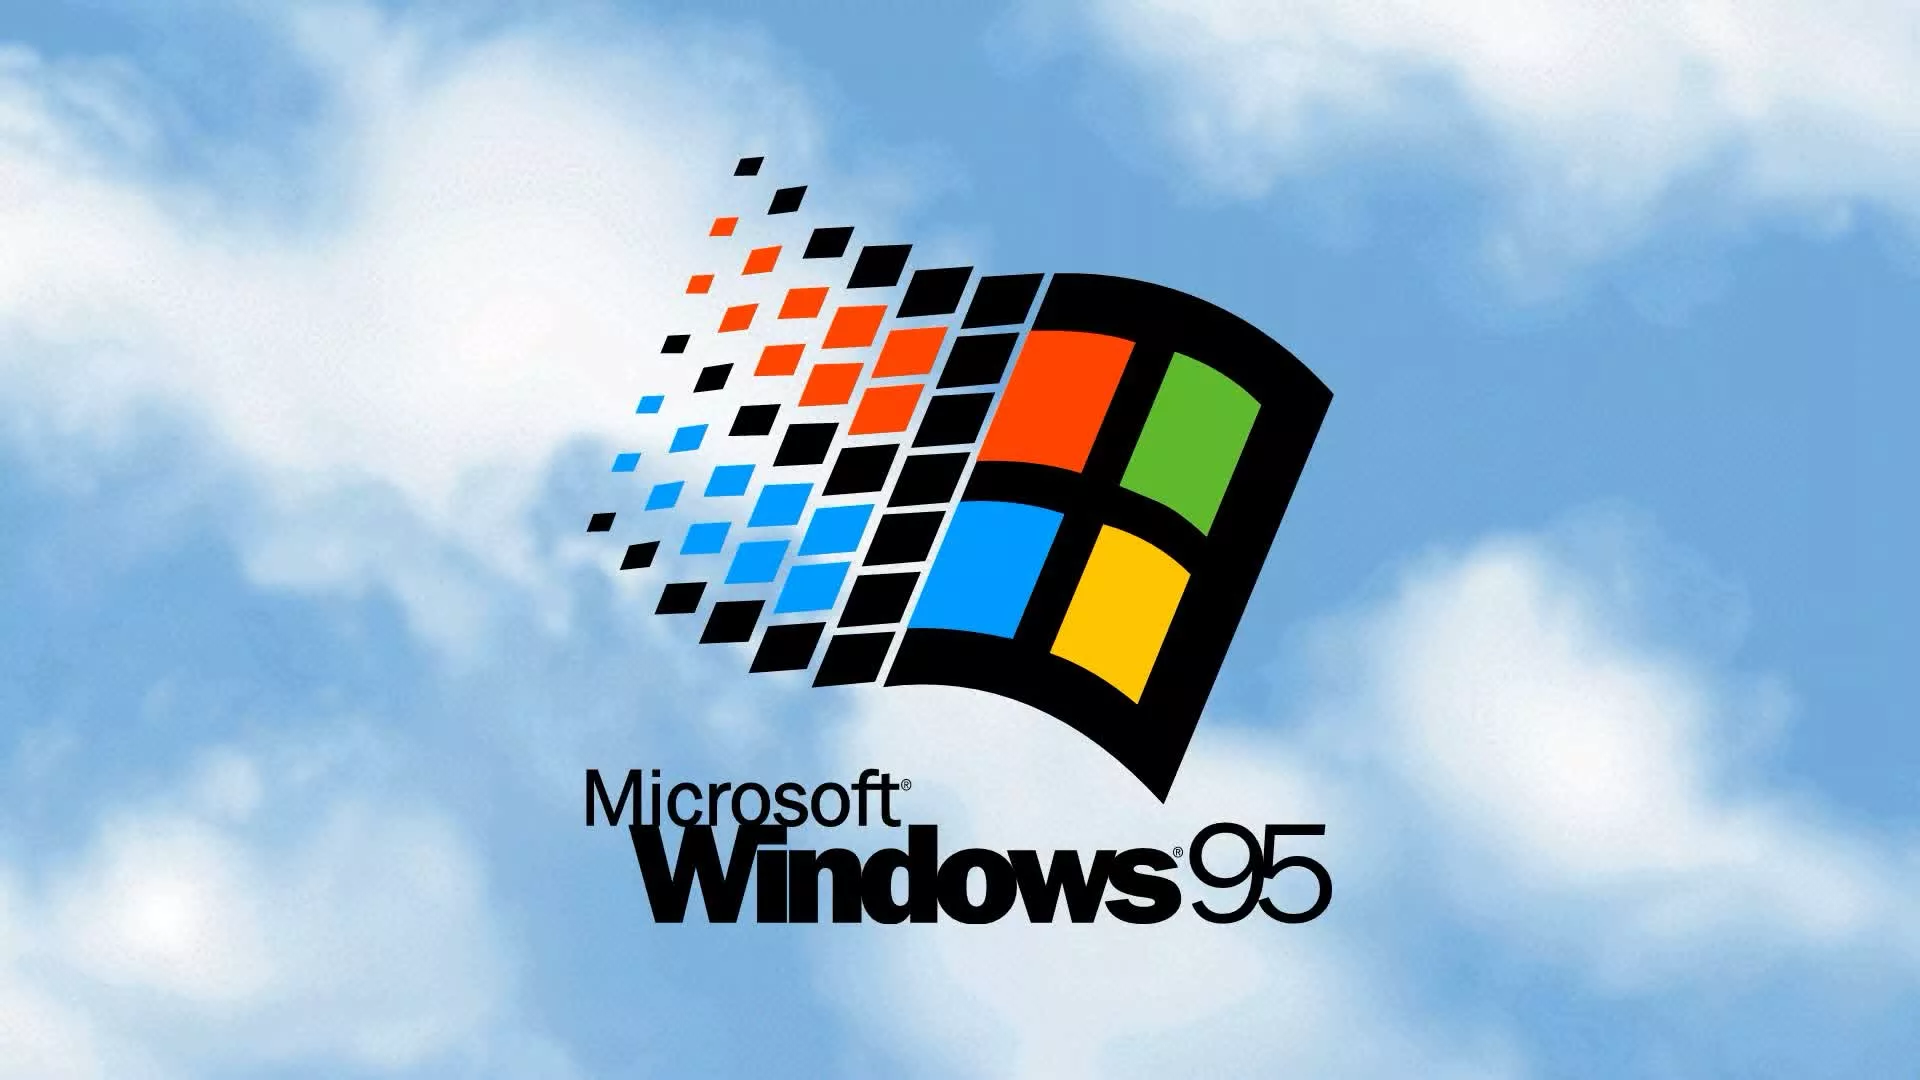 Someone wrote a Javascript app that accurately emulates Windows 95 on almost any platform